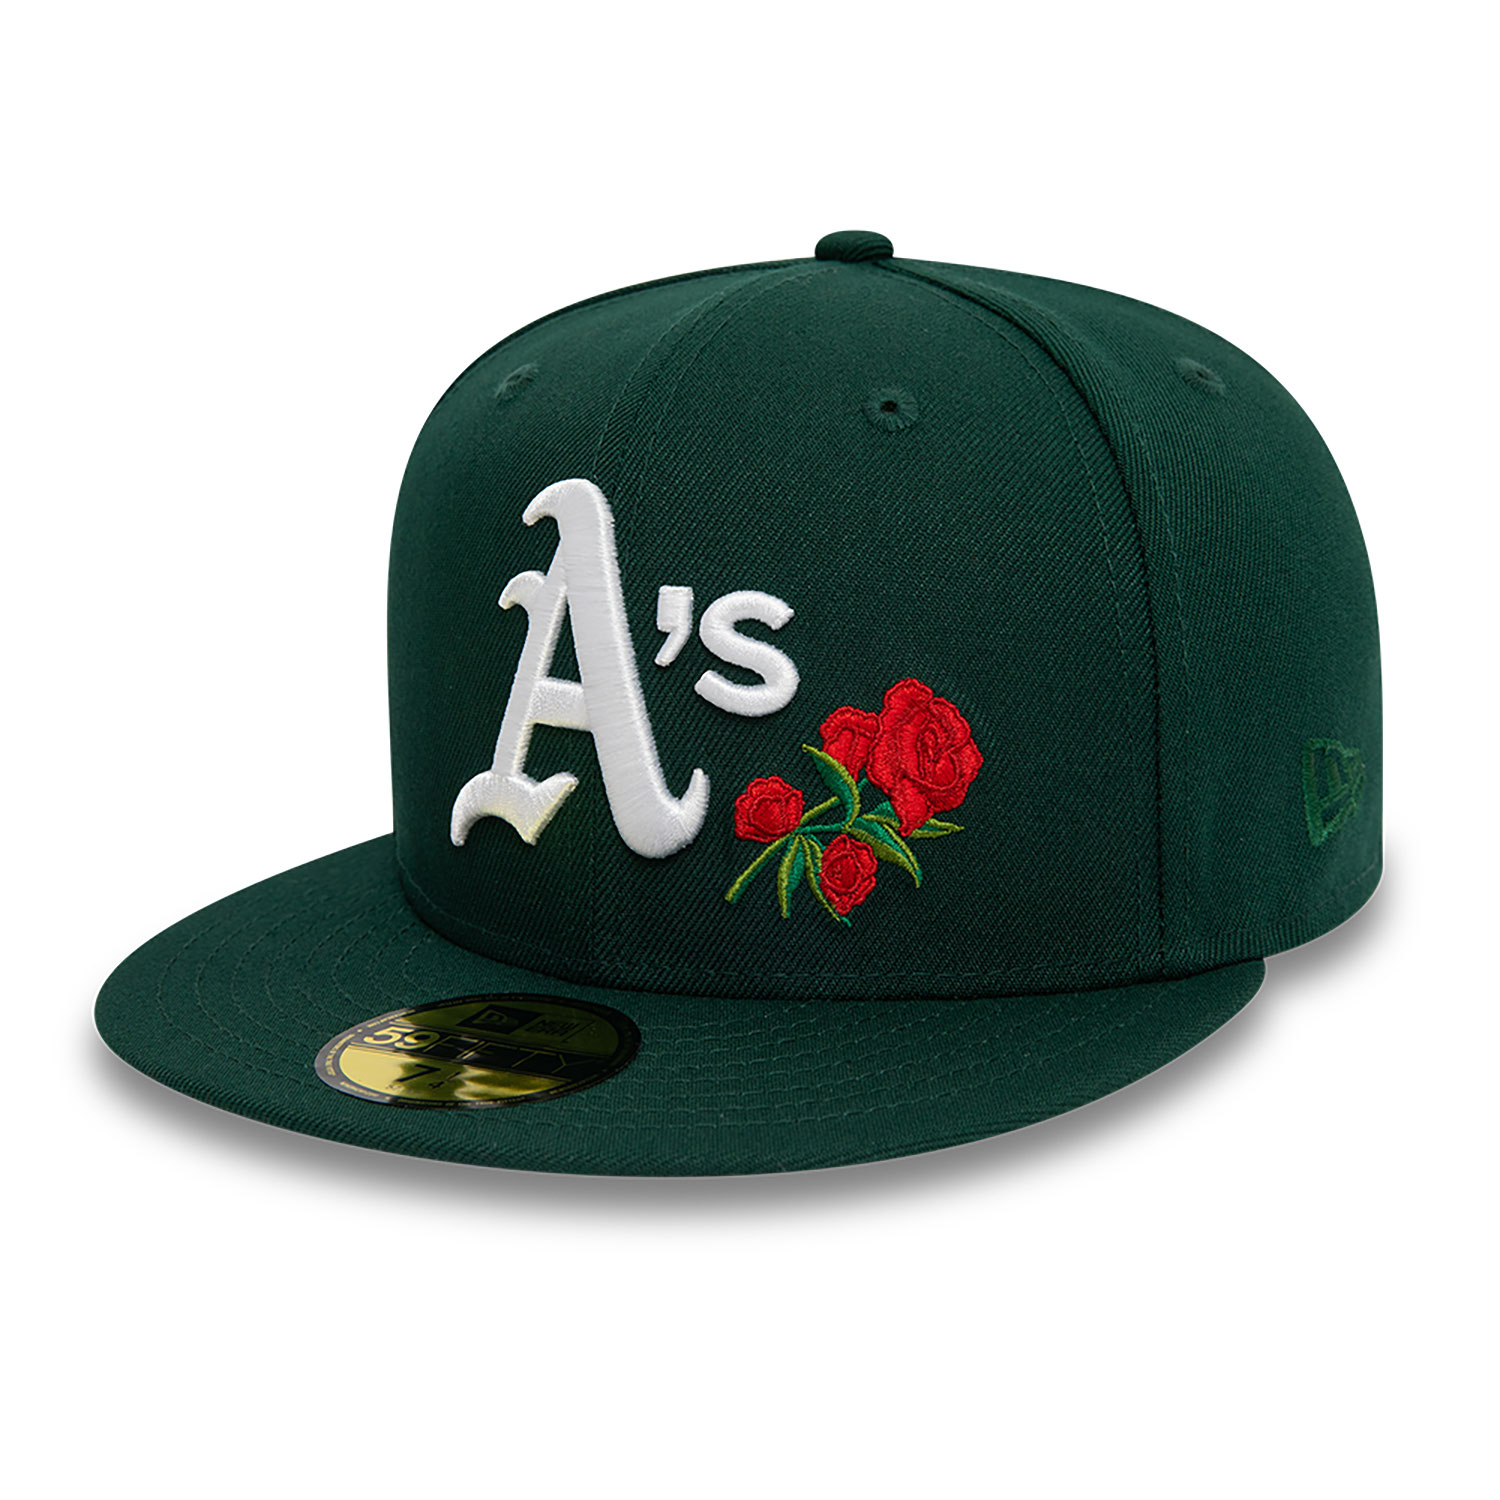 Oakland Athletics MLB Floral Dark Green 59FIFTY Fitted Cap